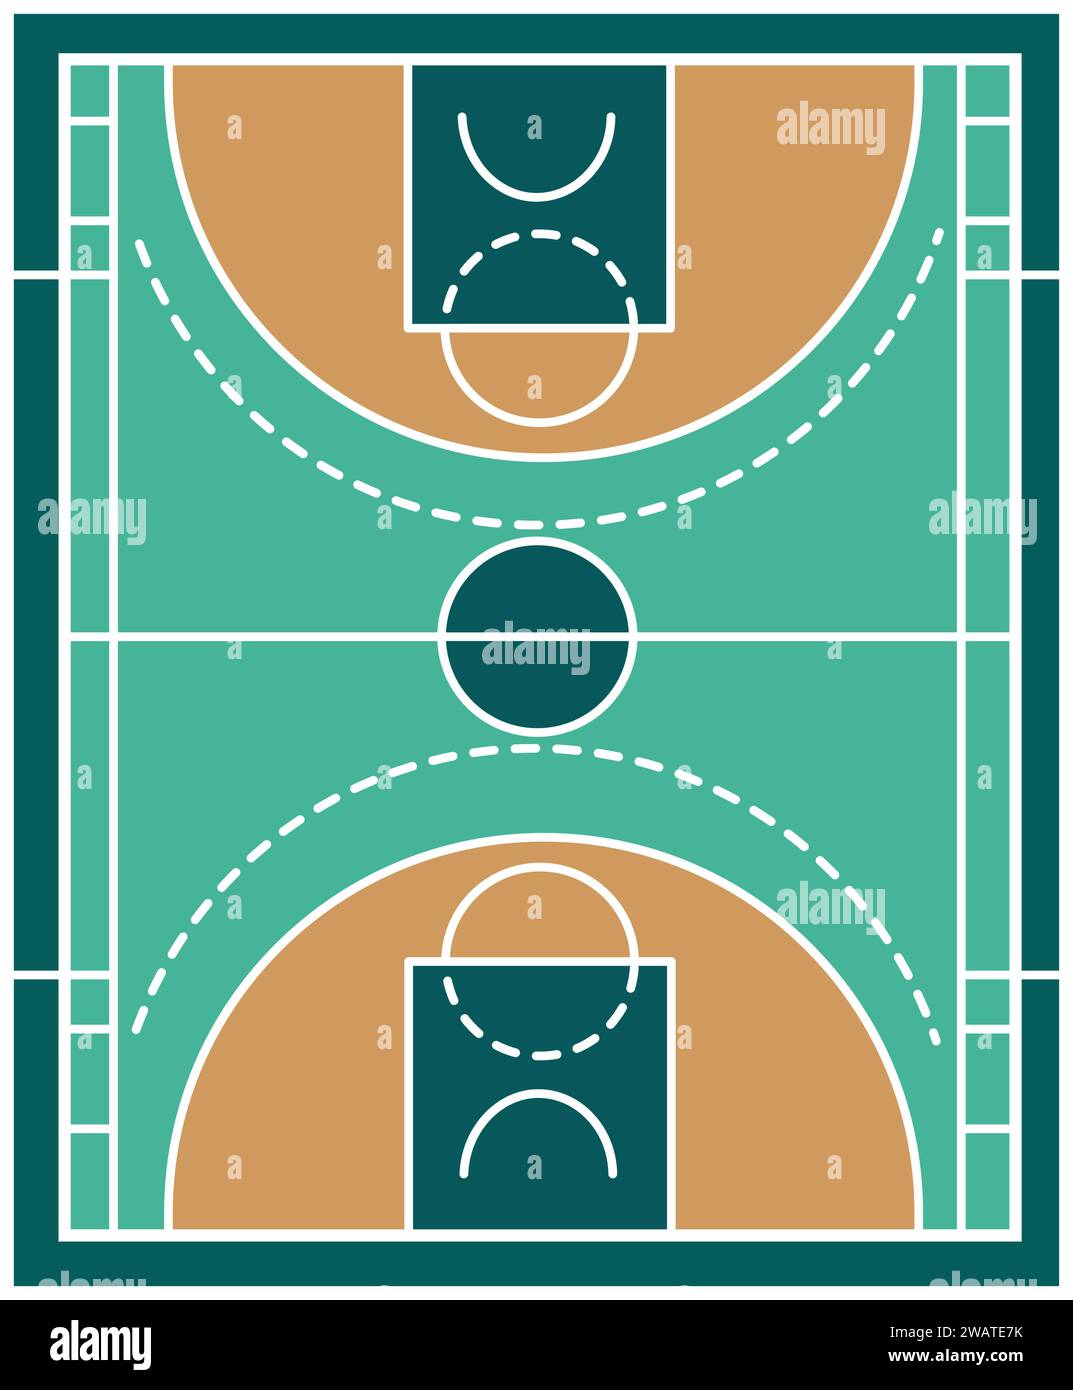 Experience the game from a bird's eye view with our Basketball Court Vector Top View. This detailed illustration showcases the layout and dimensions o Stock Vector